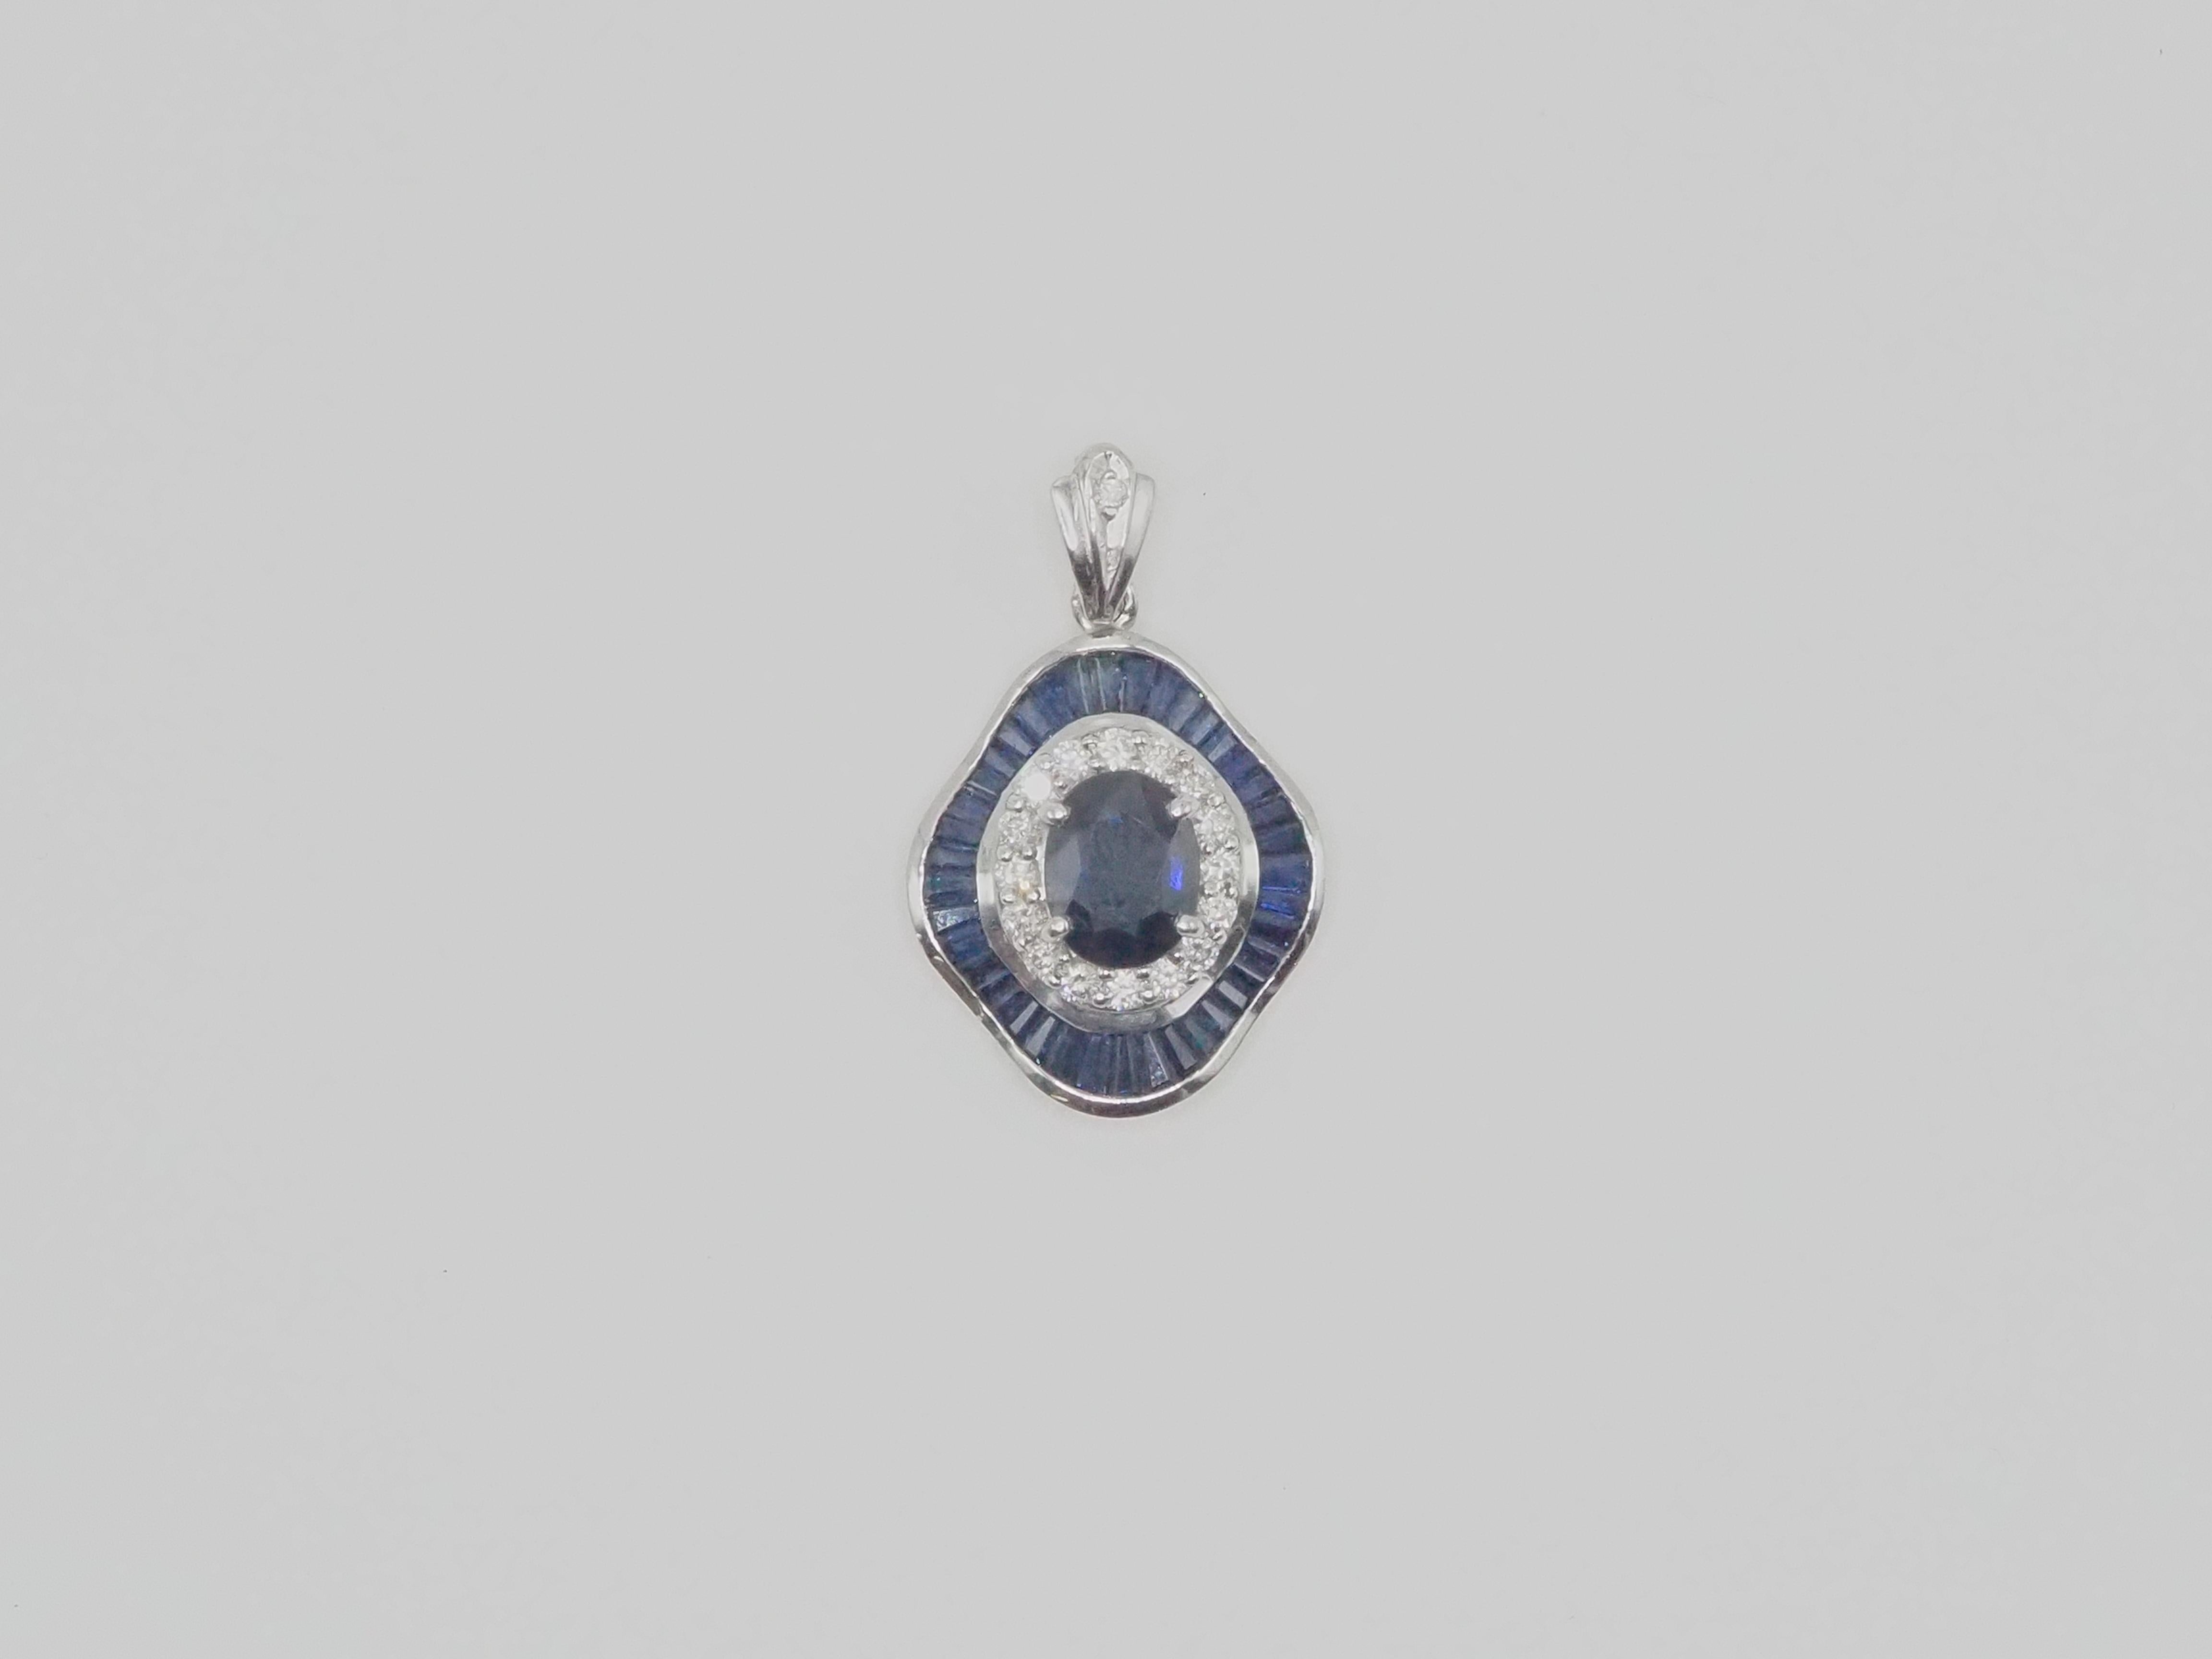 *Chain is not included*
A beautiful and quality cocktail pendant enhancer. This beautiful piece is crafted using 18K solid white gold. The piece is adorned with gorgeous oval and calibrated cut well- saturated blue sapphire and with 0.43 carats of